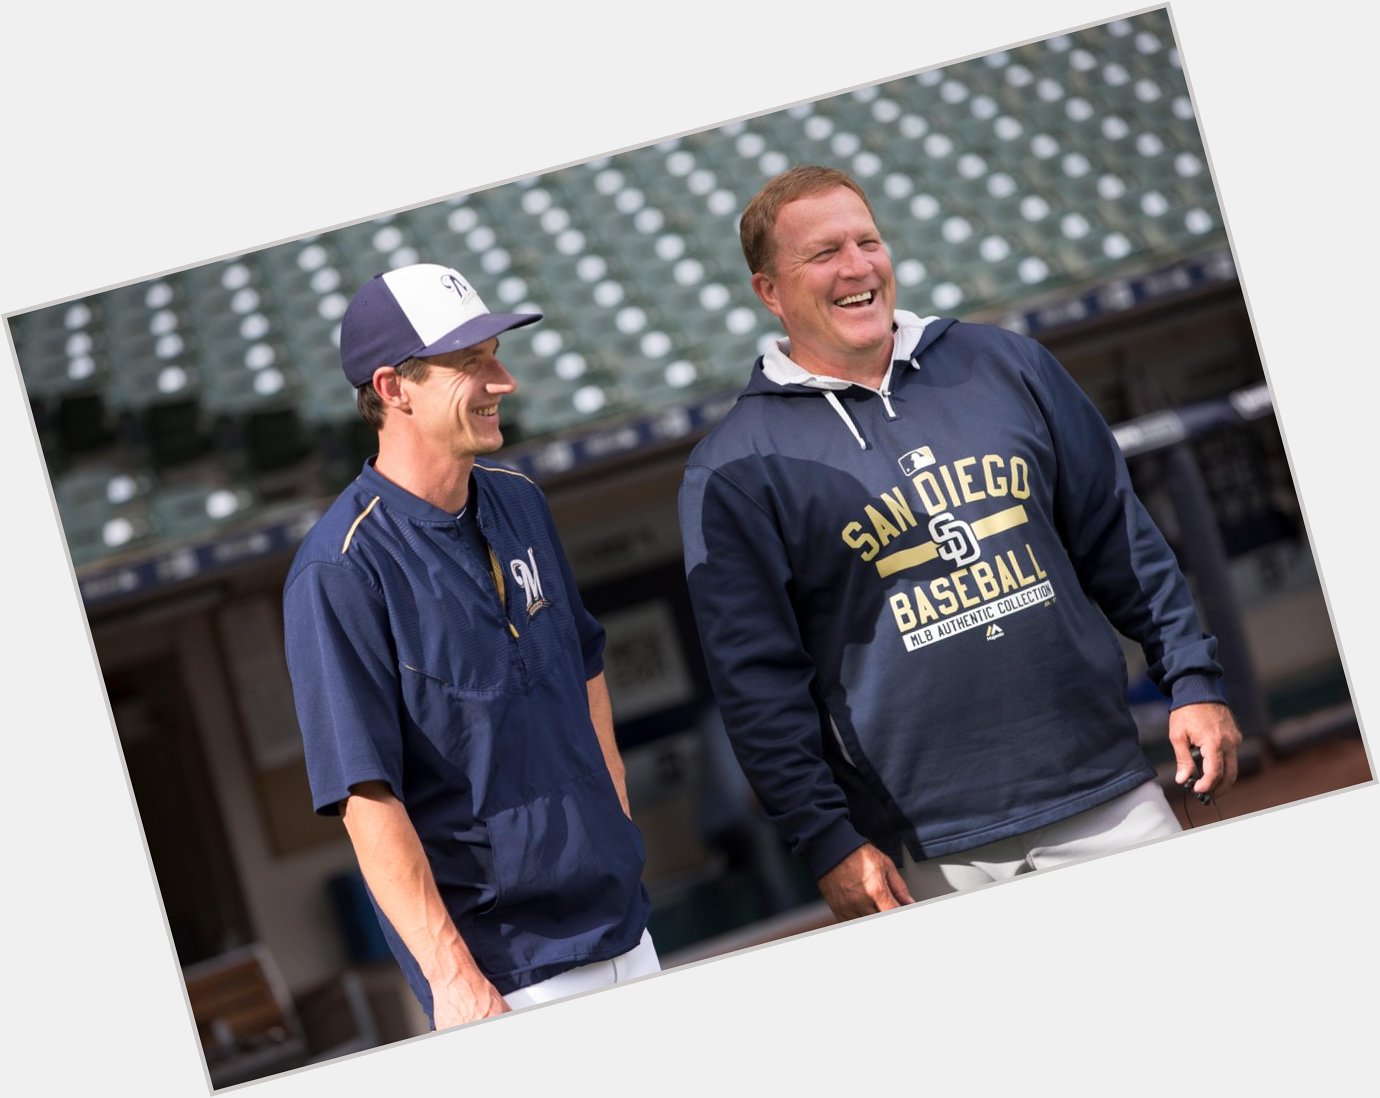 Happy Bday to & current manager Craig Counsell!

COUNSELL - MURPHY CONNECTION:  